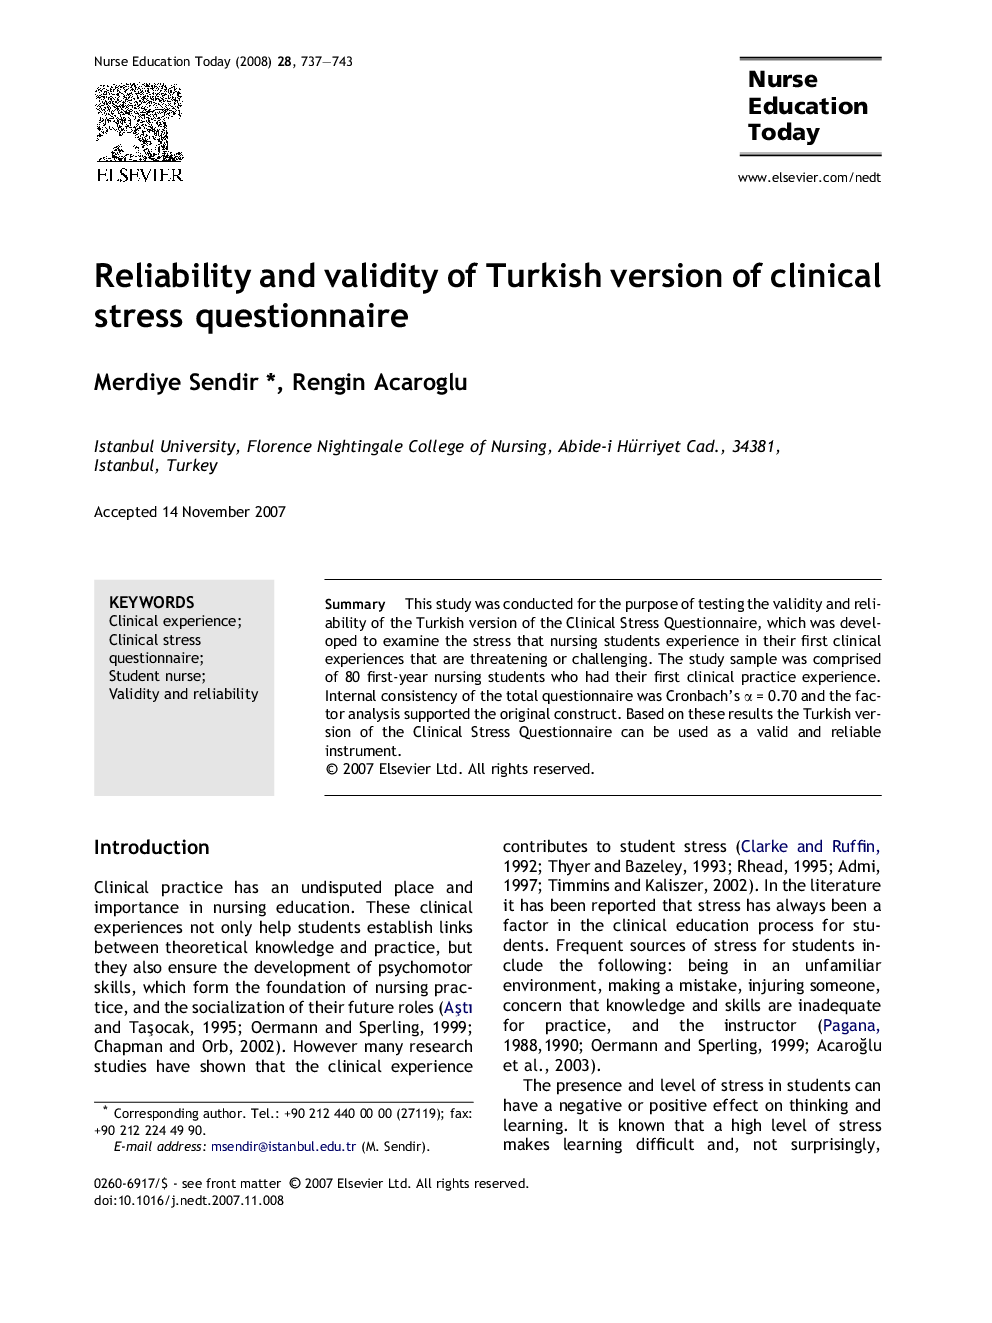 Reliability and validity of Turkish version of clinical stress questionnaire